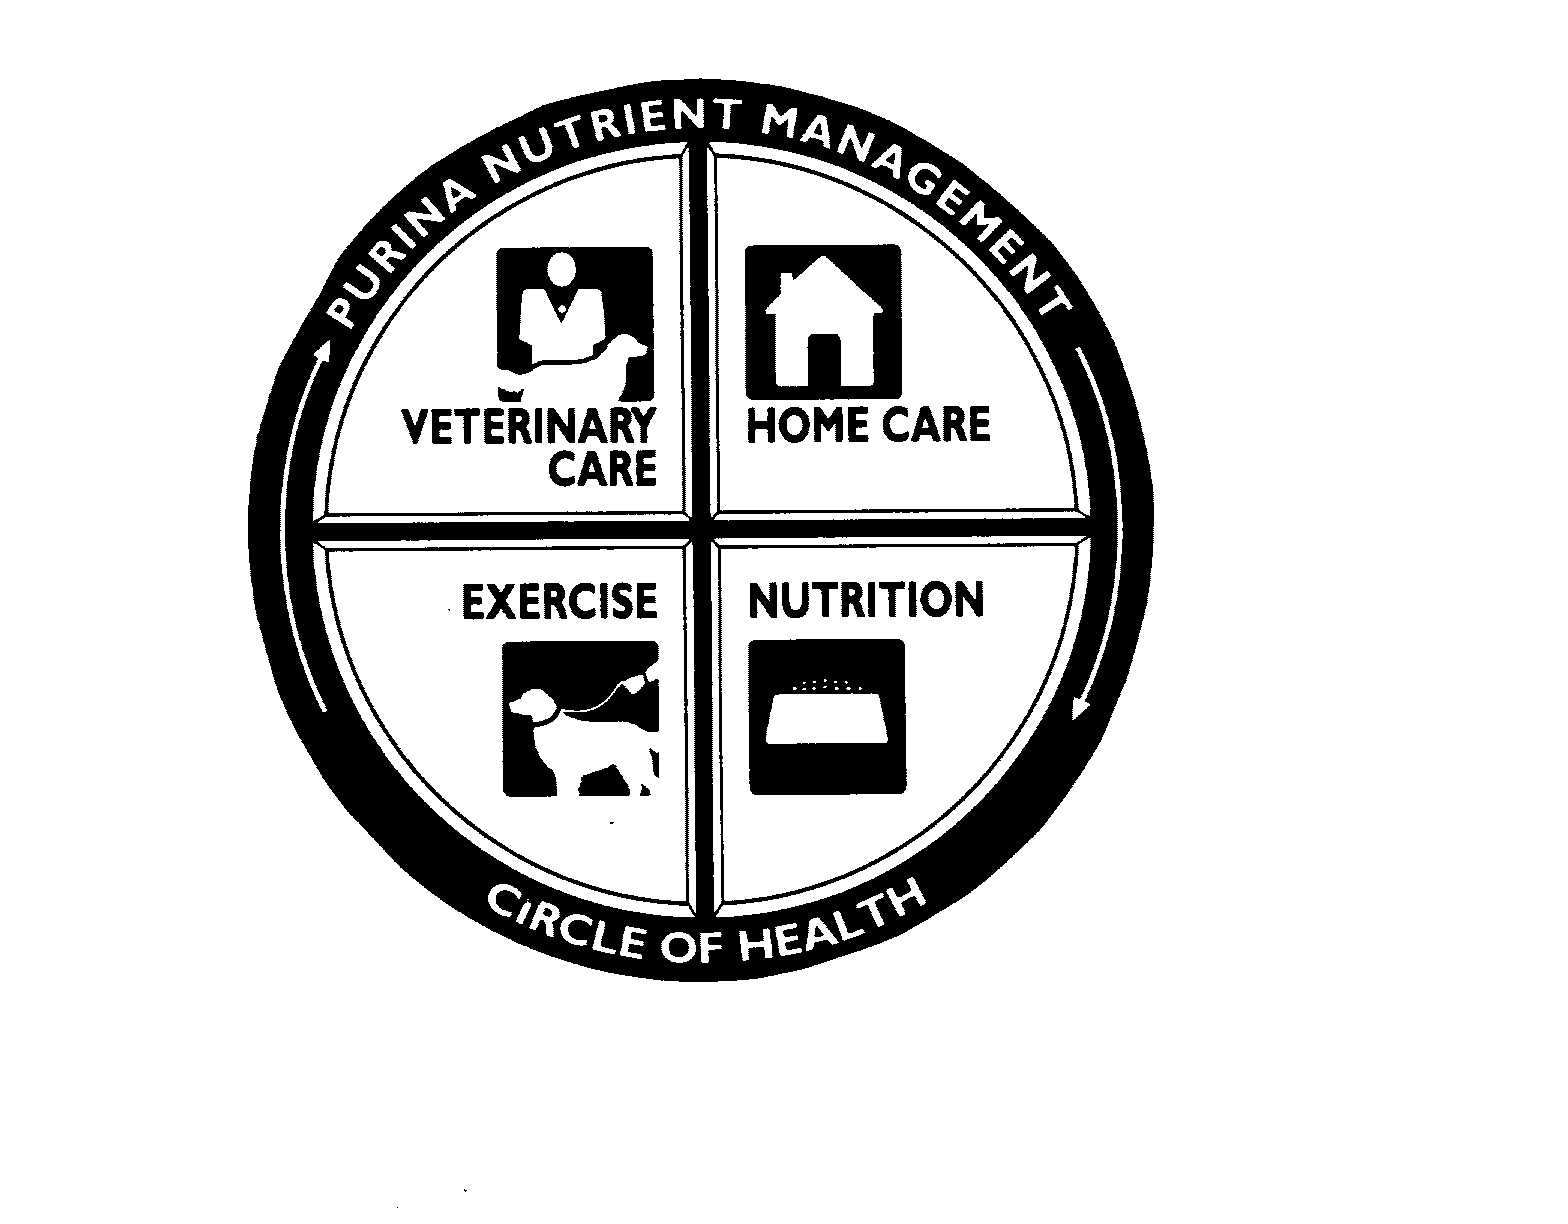  PURINA NUTRIENT MANAGEMENT CIRCLE OF HEALTH